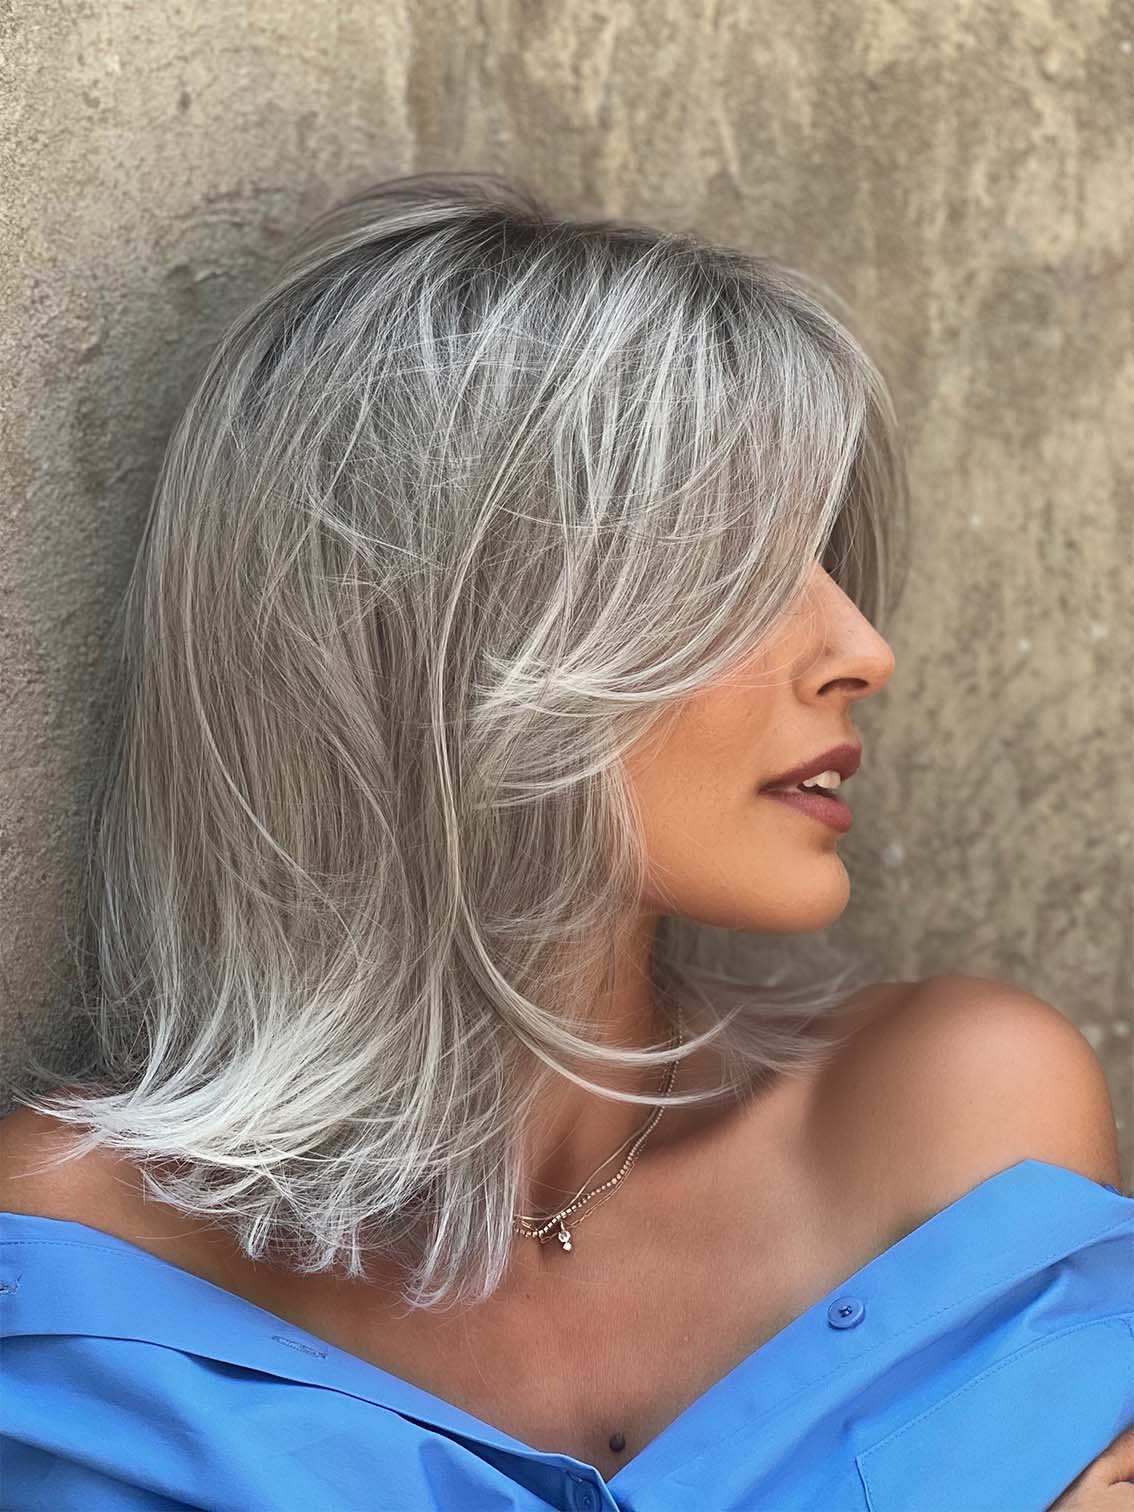 MELODY LARGE by ELLEN WILLE in STONEGREY ROOTED 58.51.56 | Grey with Black/Dark Brown and Lightest Blonde Blend with Shaded Roots